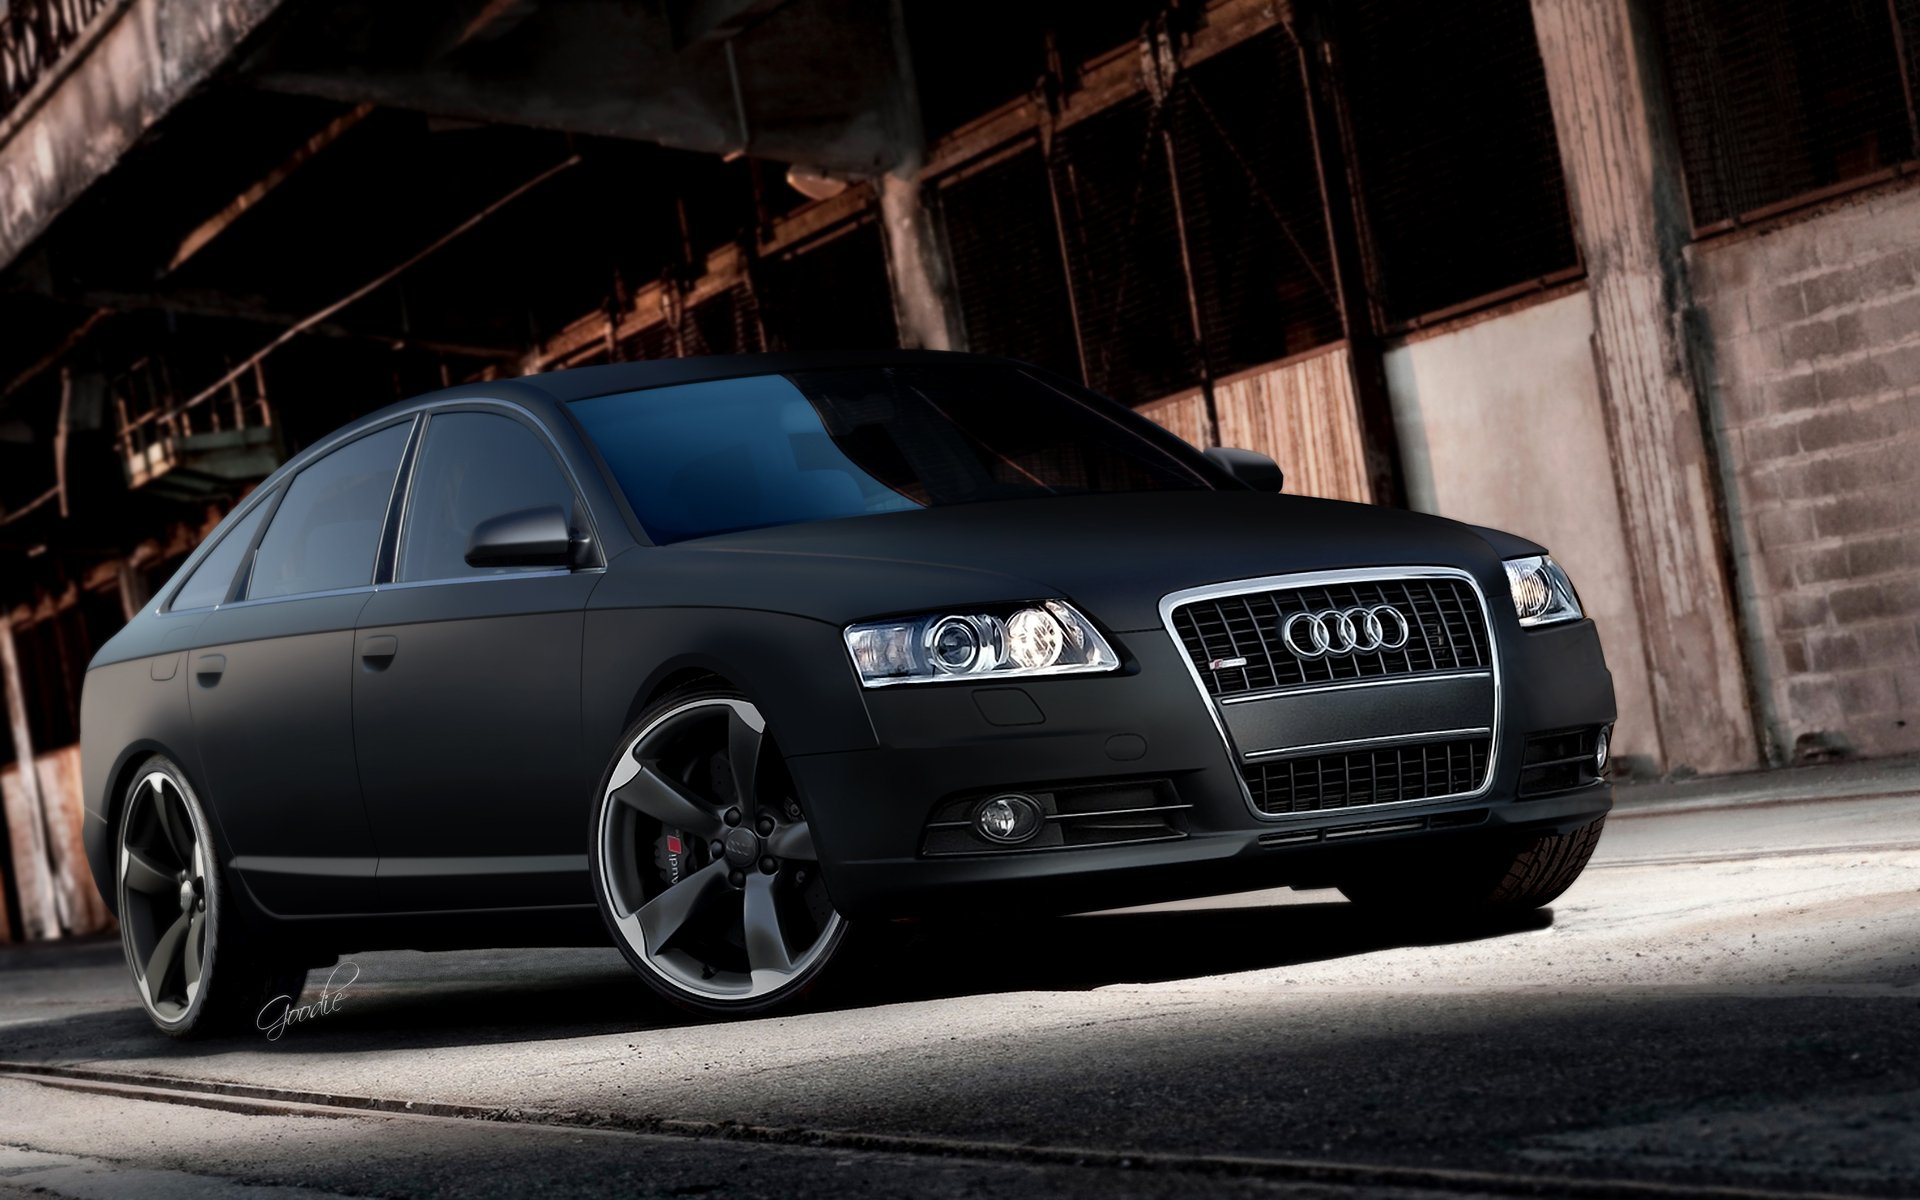 Audi A6 S Line Hd Wallpaper Background Image 1920x1200